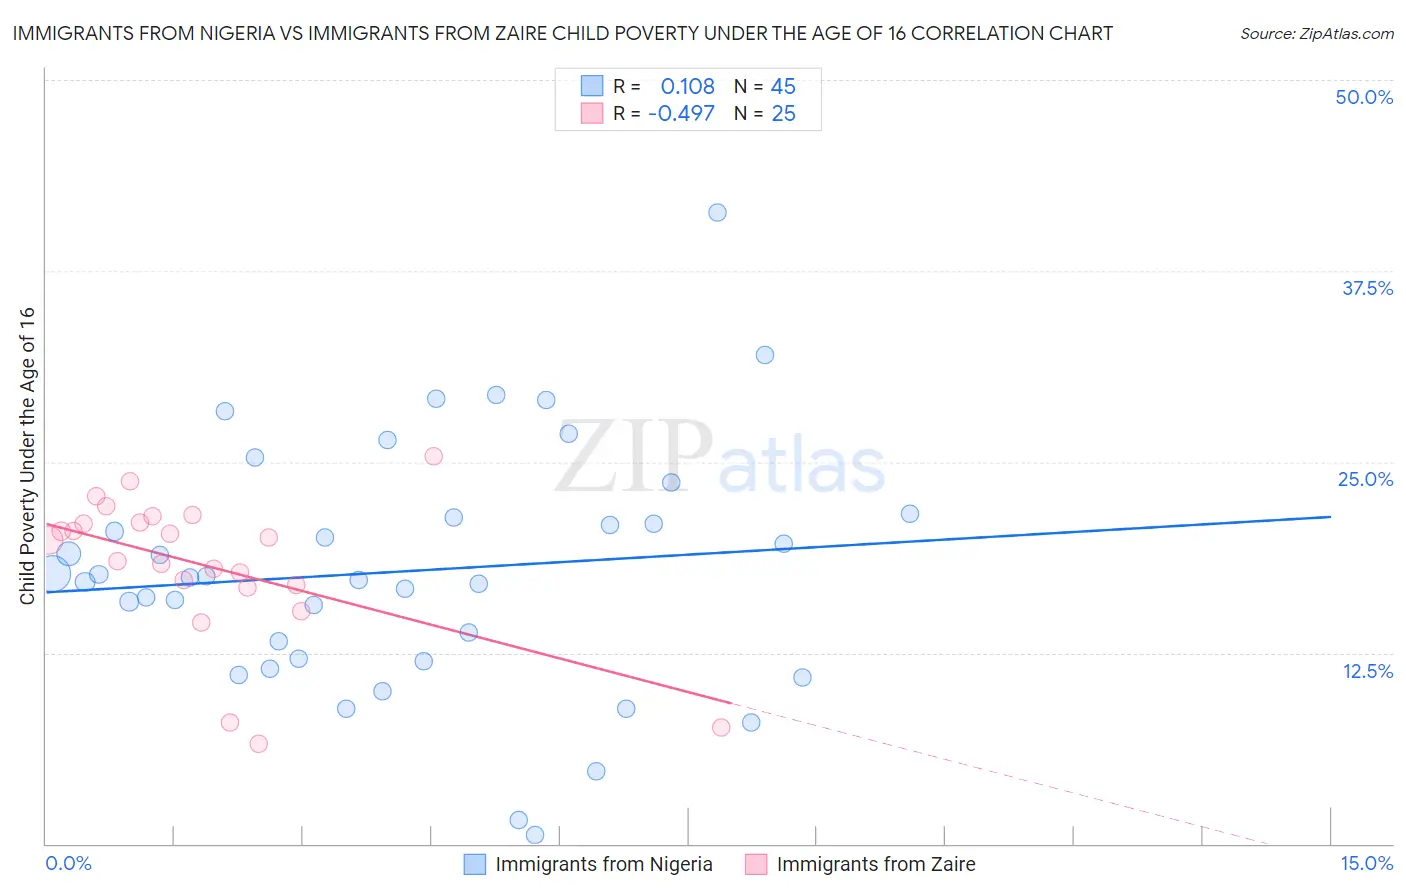 Immigrants from Nigeria vs Immigrants from Zaire Child Poverty Under the Age of 16